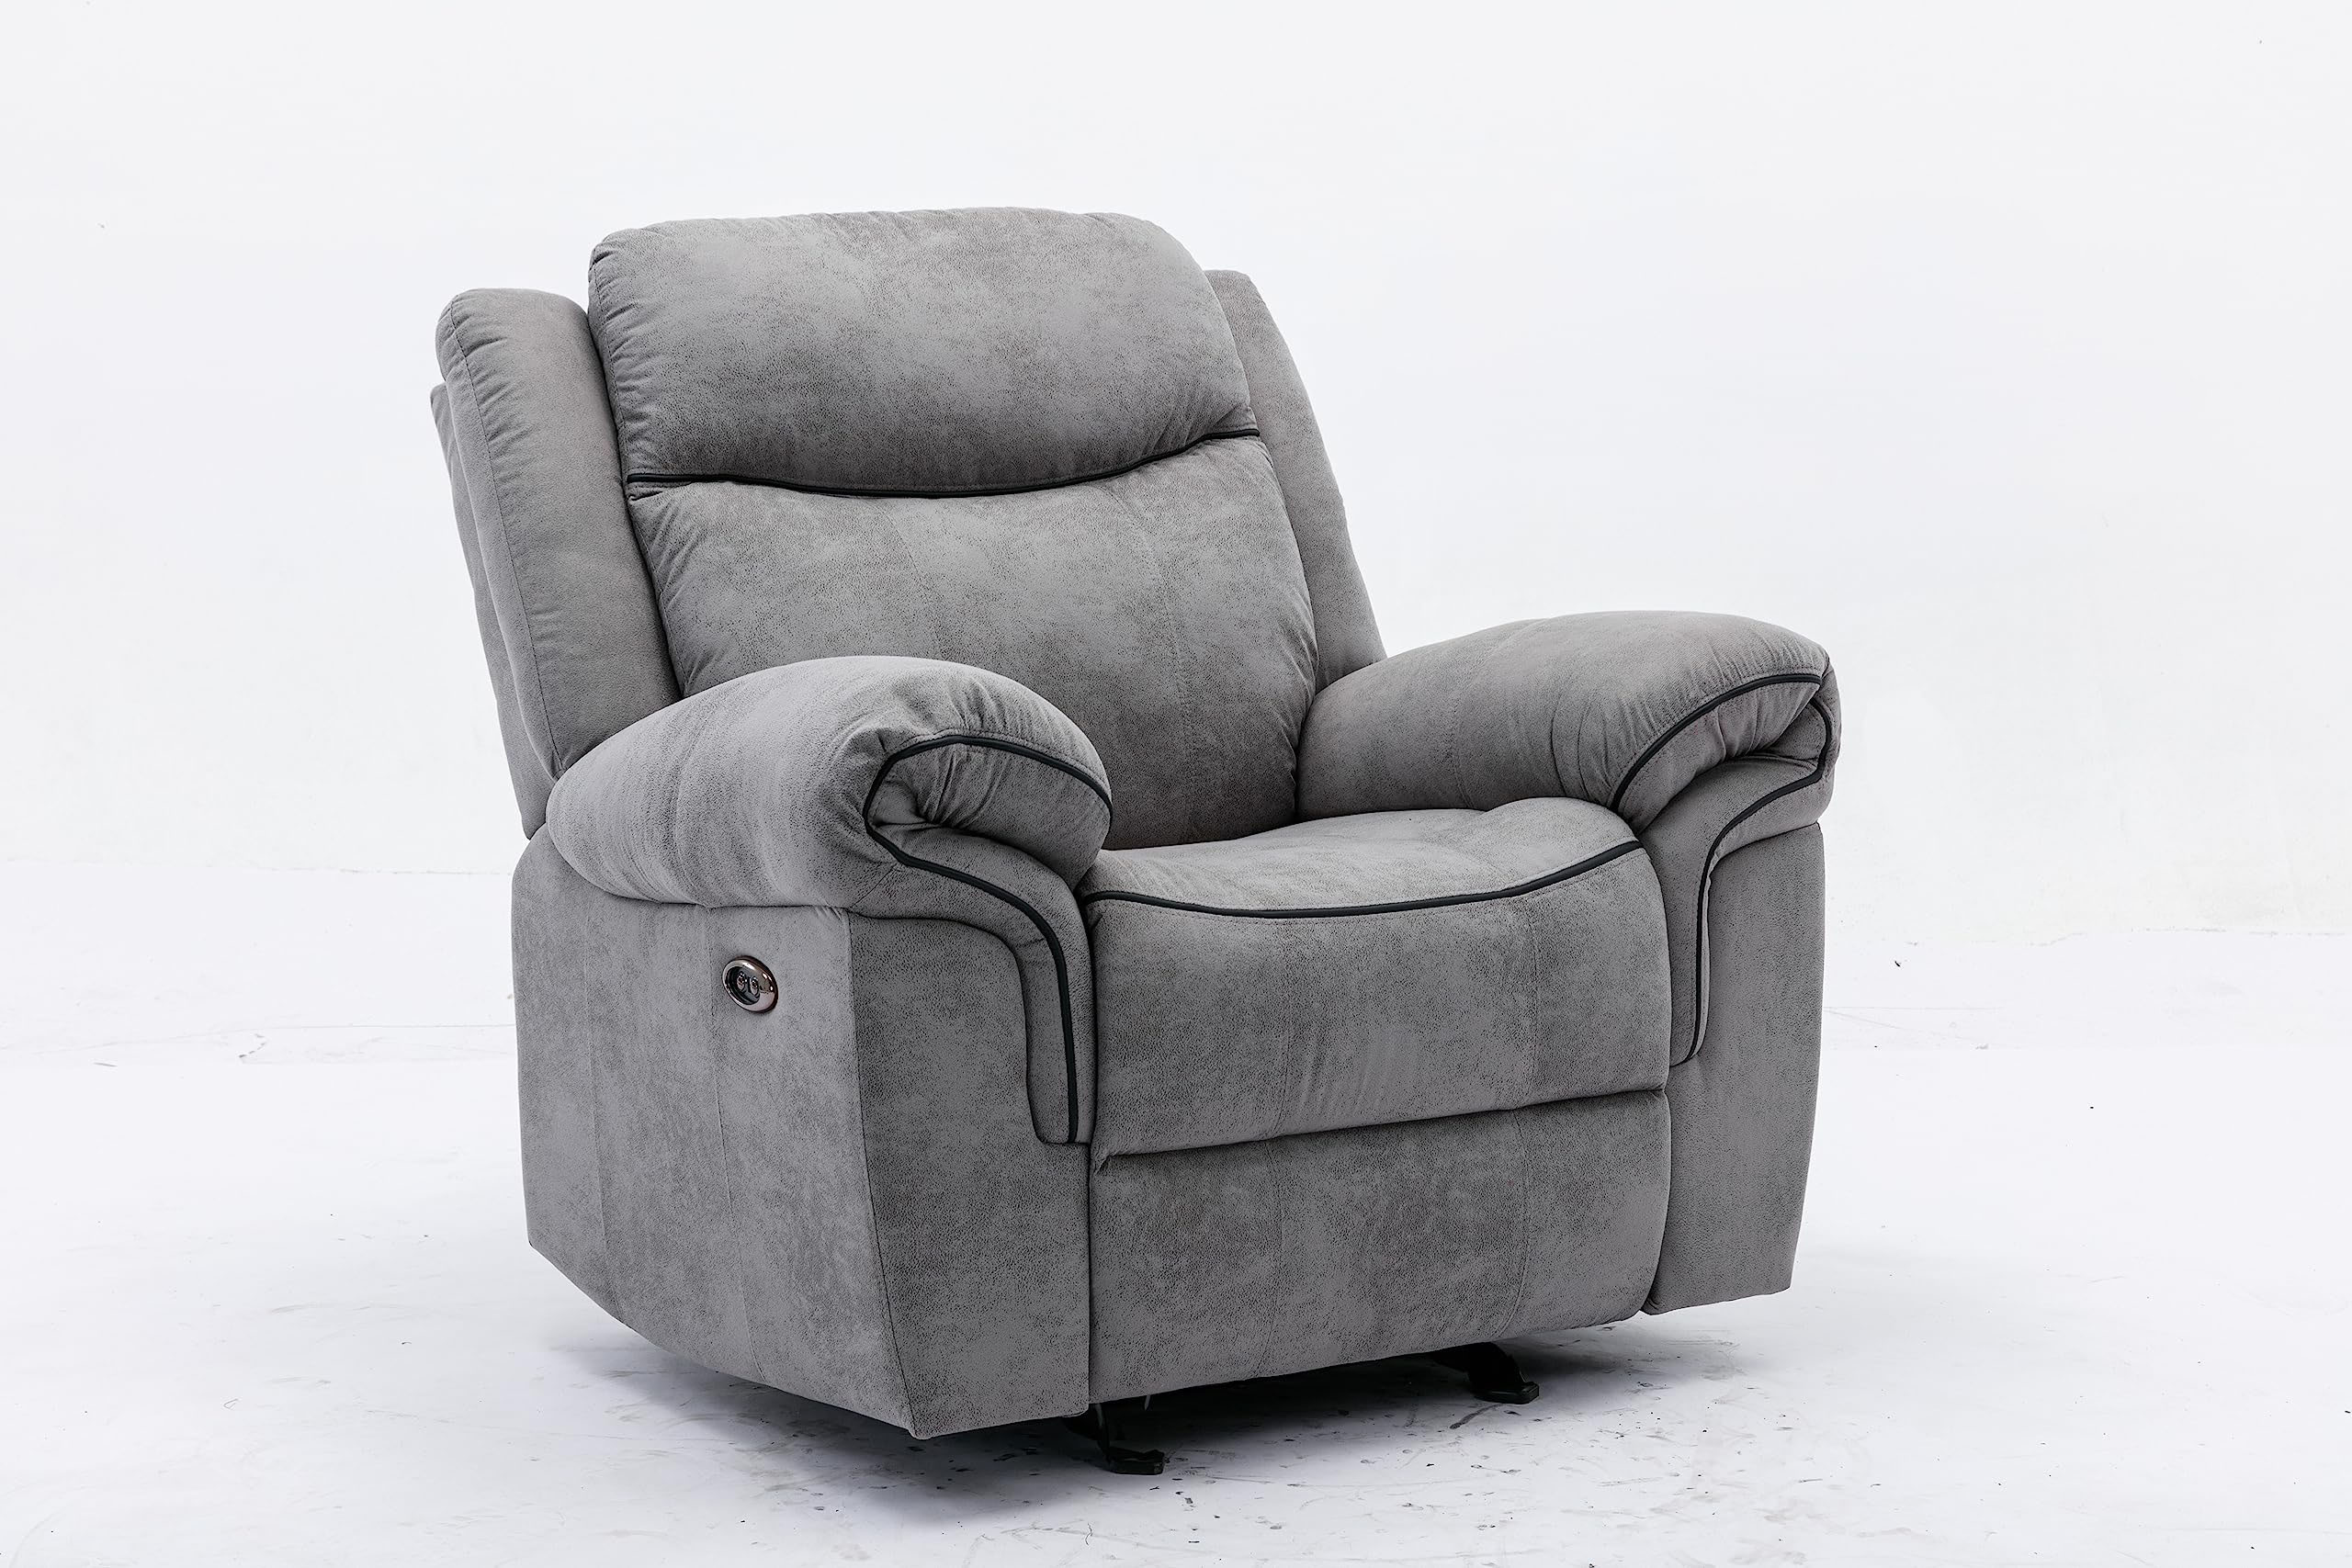 Sanora Electric Recliner Faux Leather Sofa1